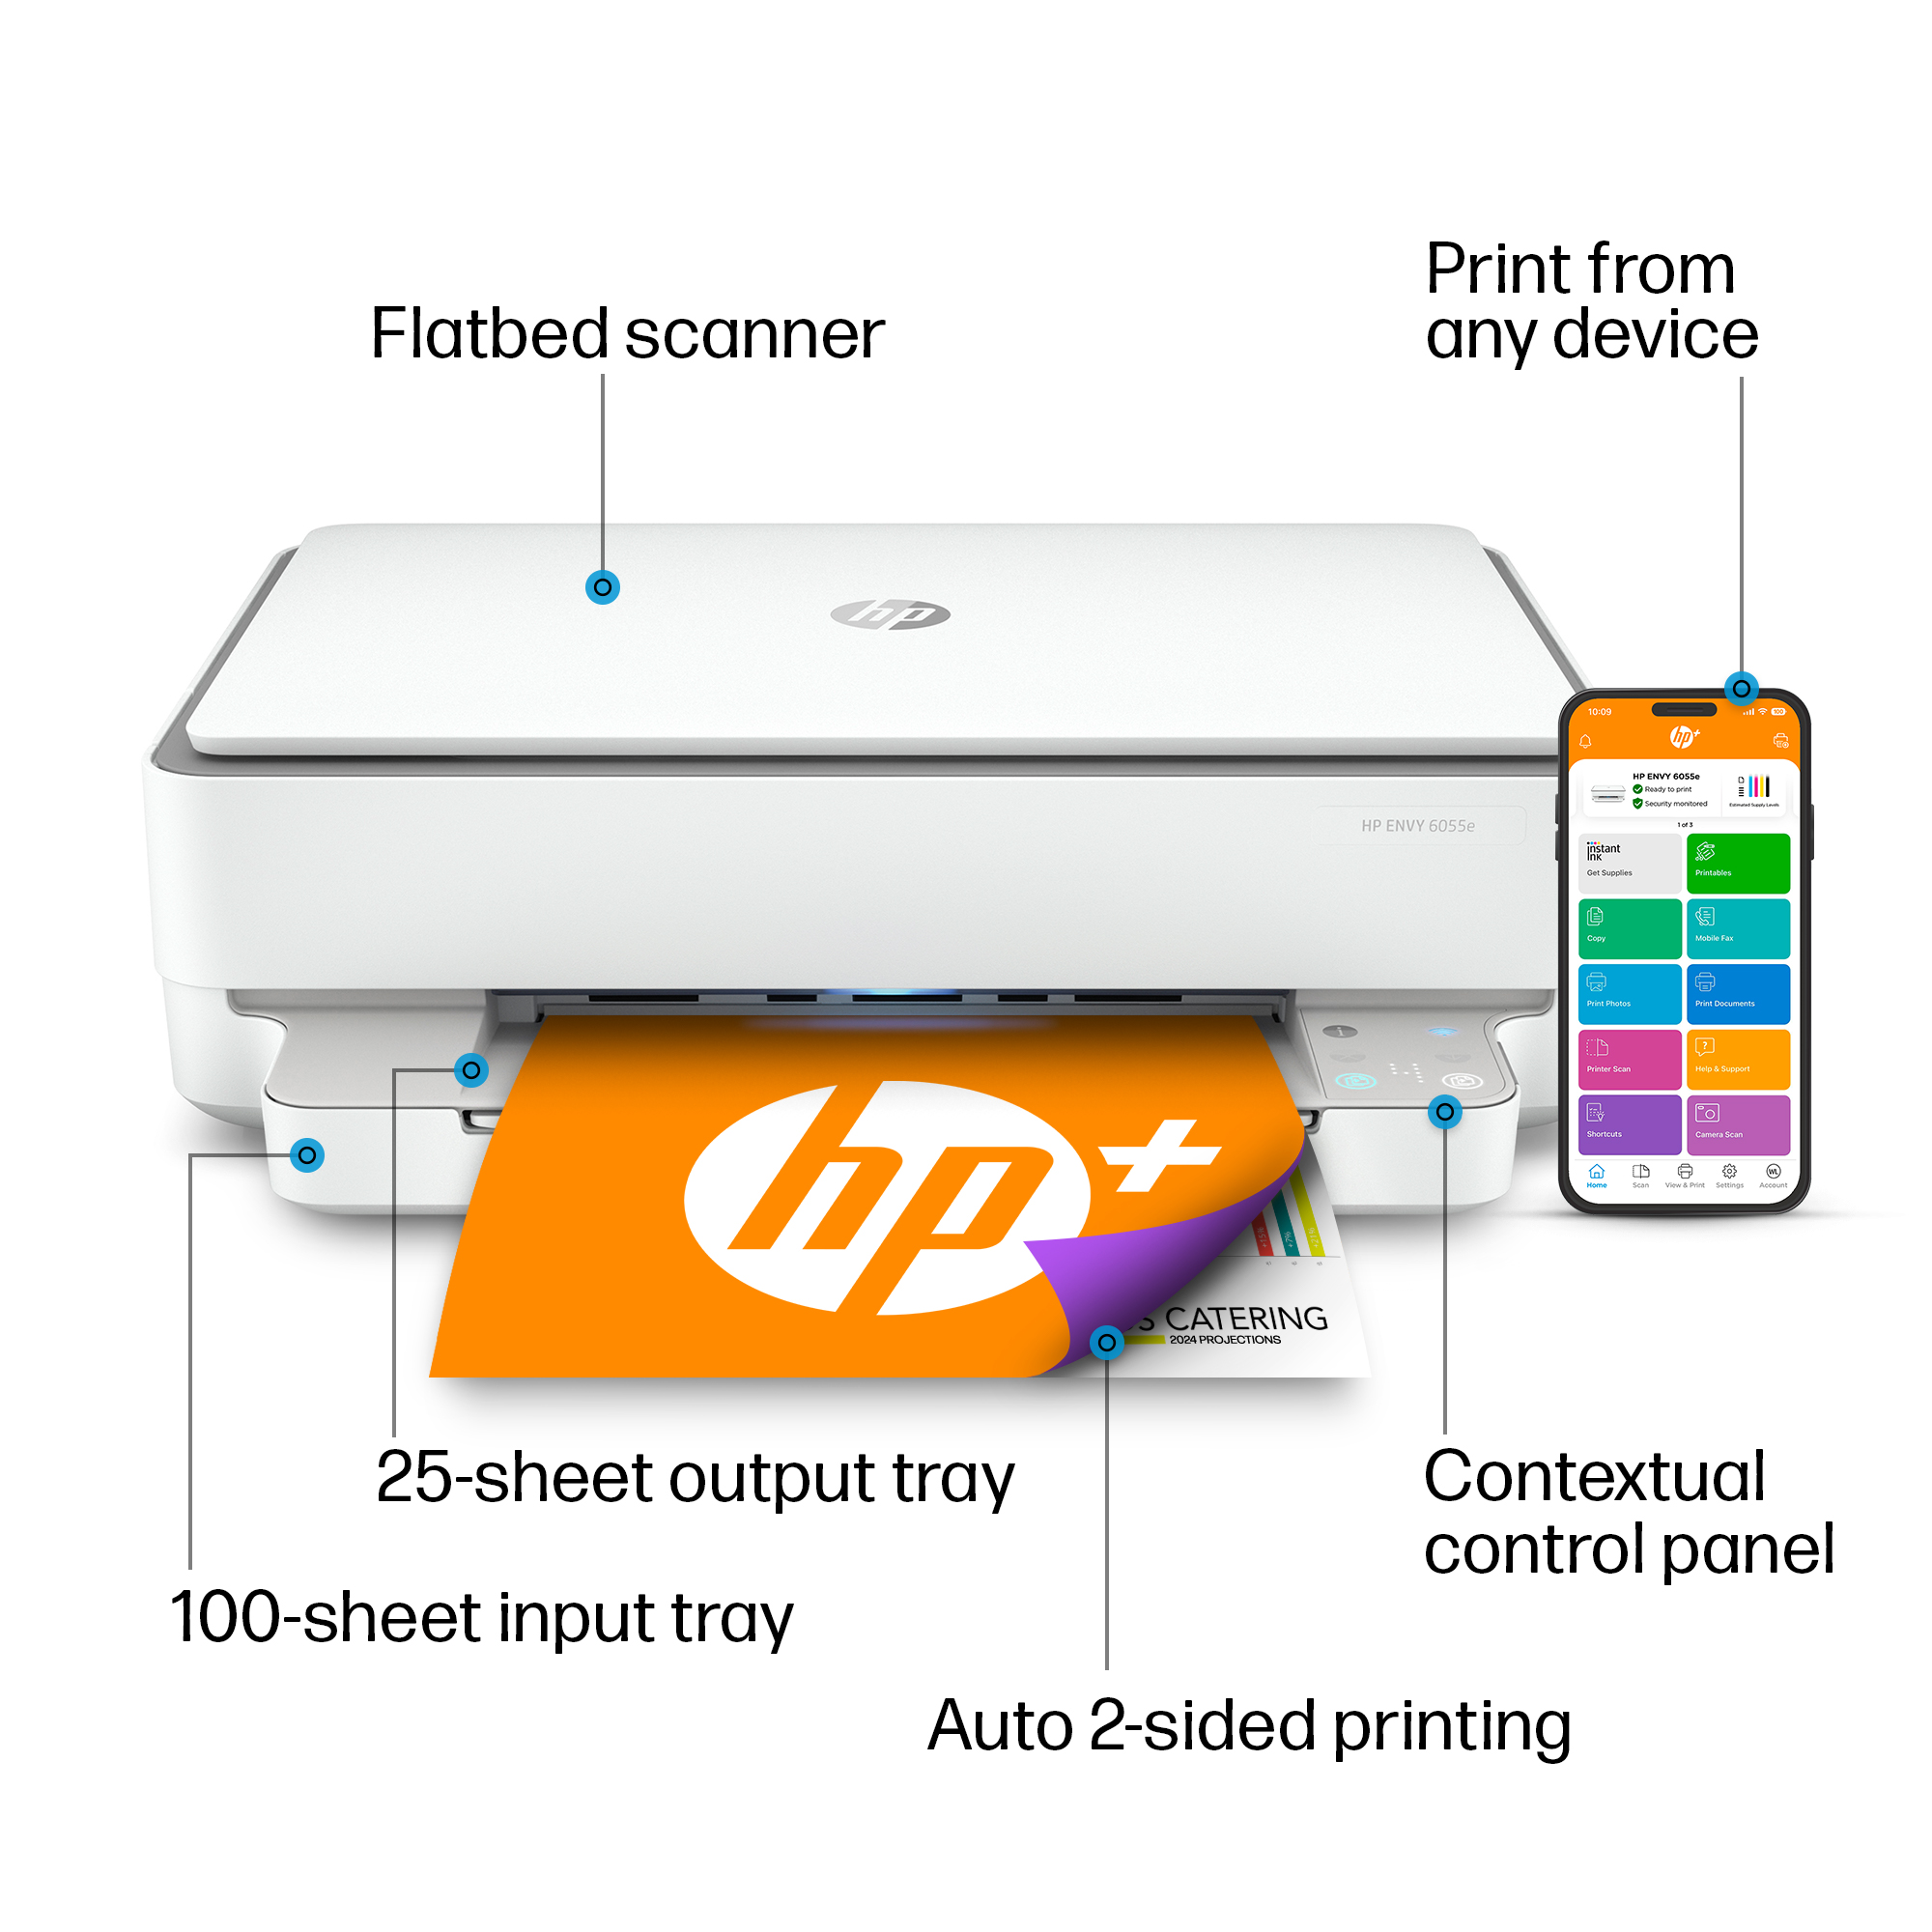 HP ENVY 6055e All-in-One Wireless Color Inkjet Printer -  3 Months Free Instant Ink with HP+ - image 9 of 19